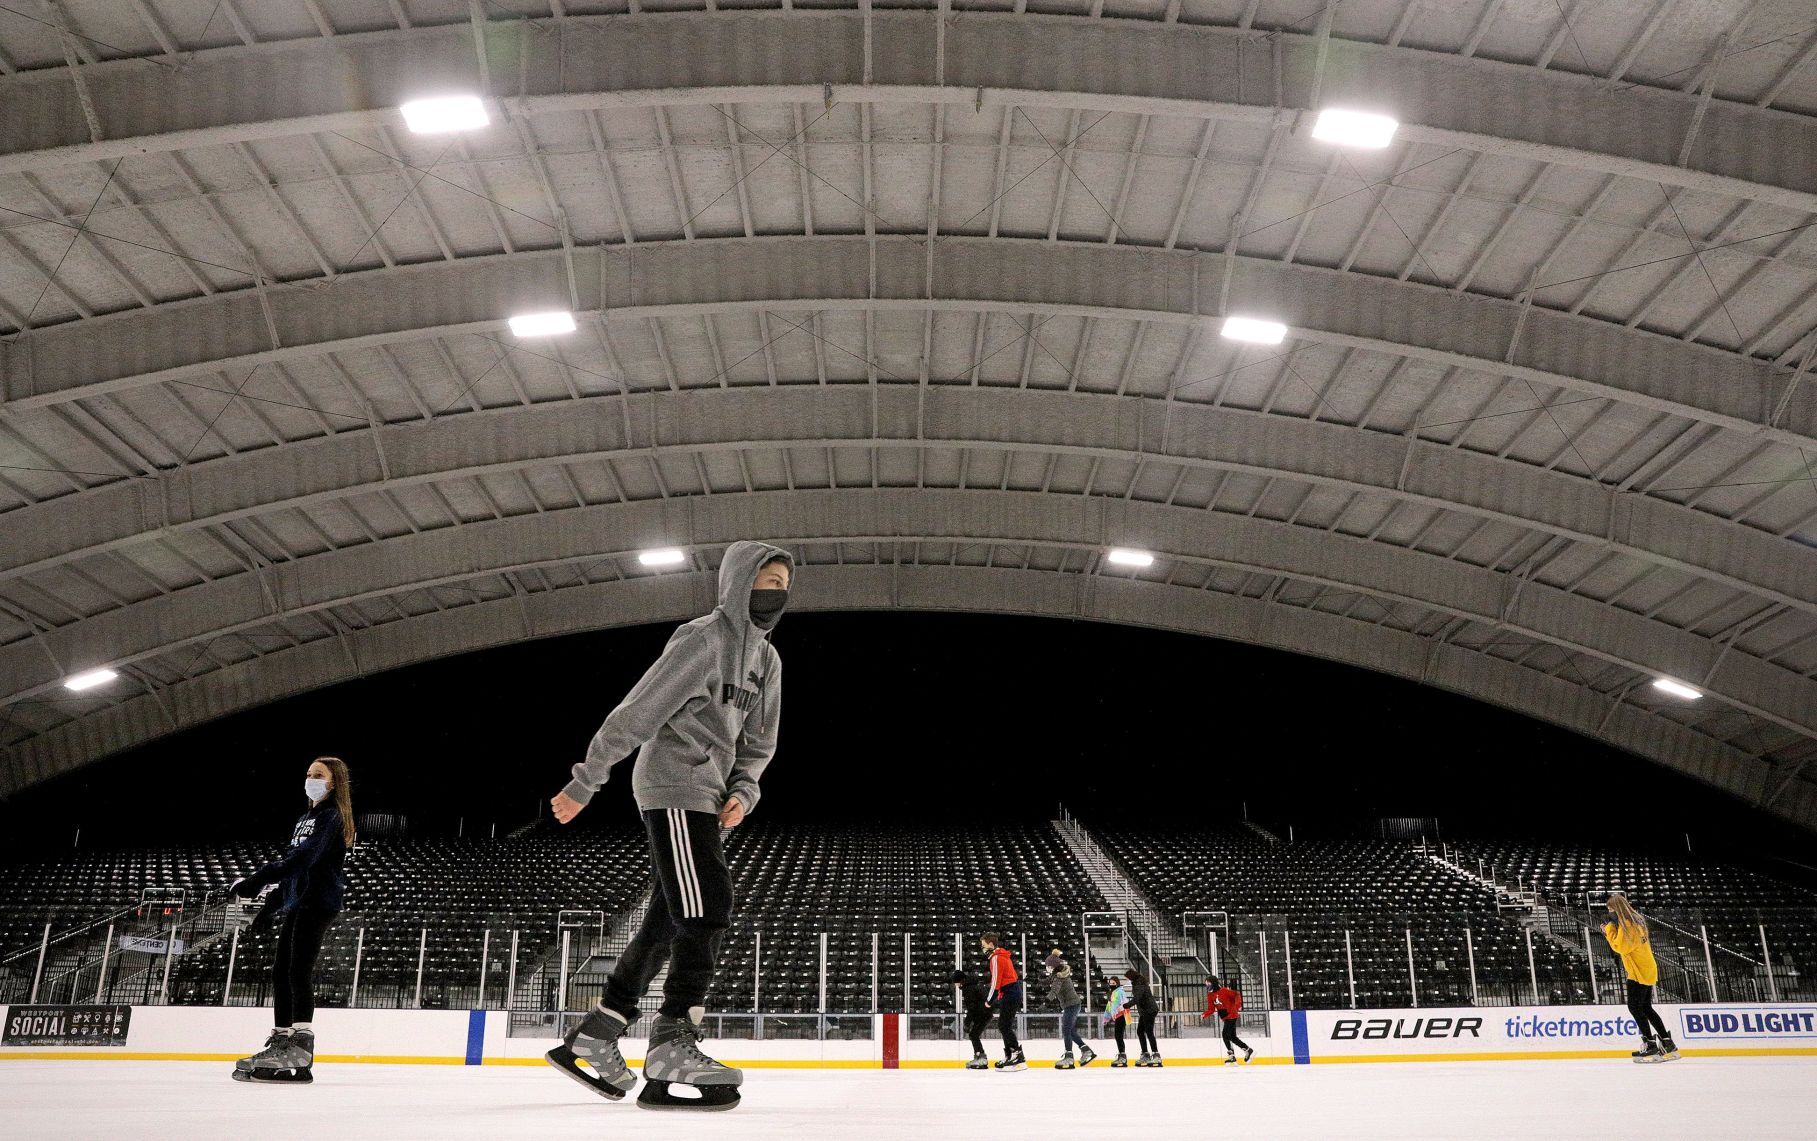 Ice rink woes force Maryland Heights to dig into city reserves